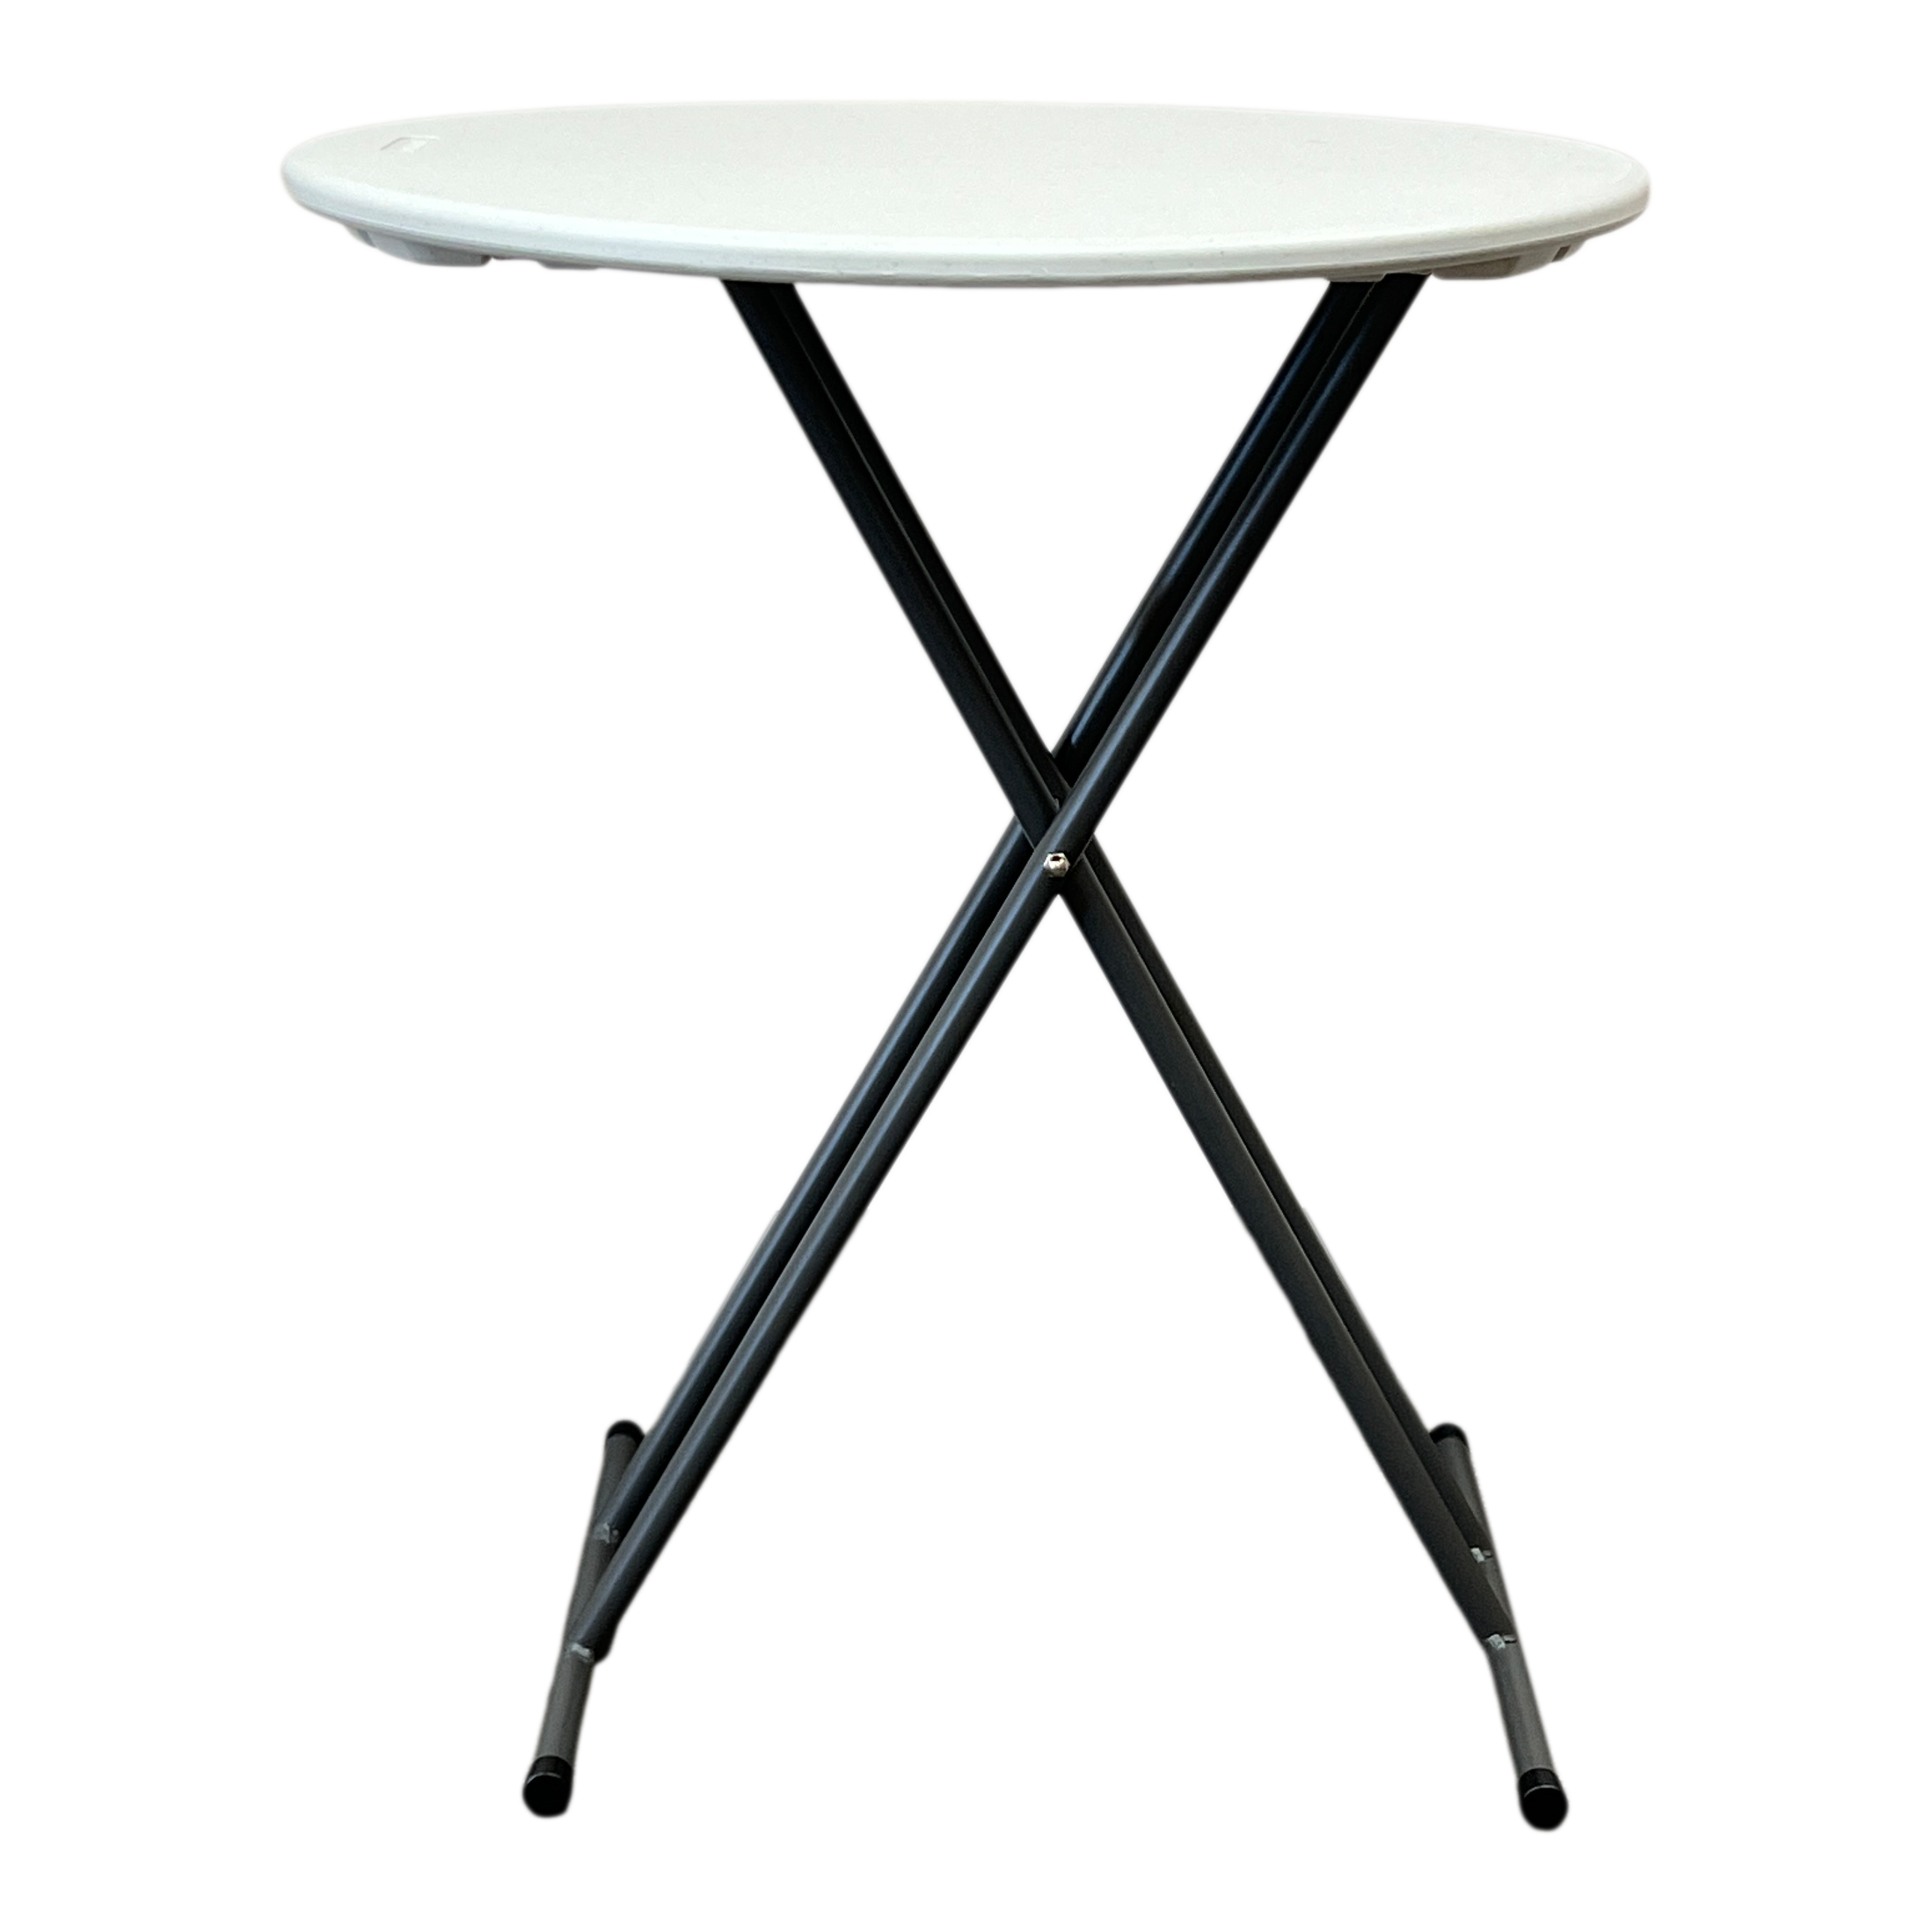 A round 24" personal platinum folding-table.